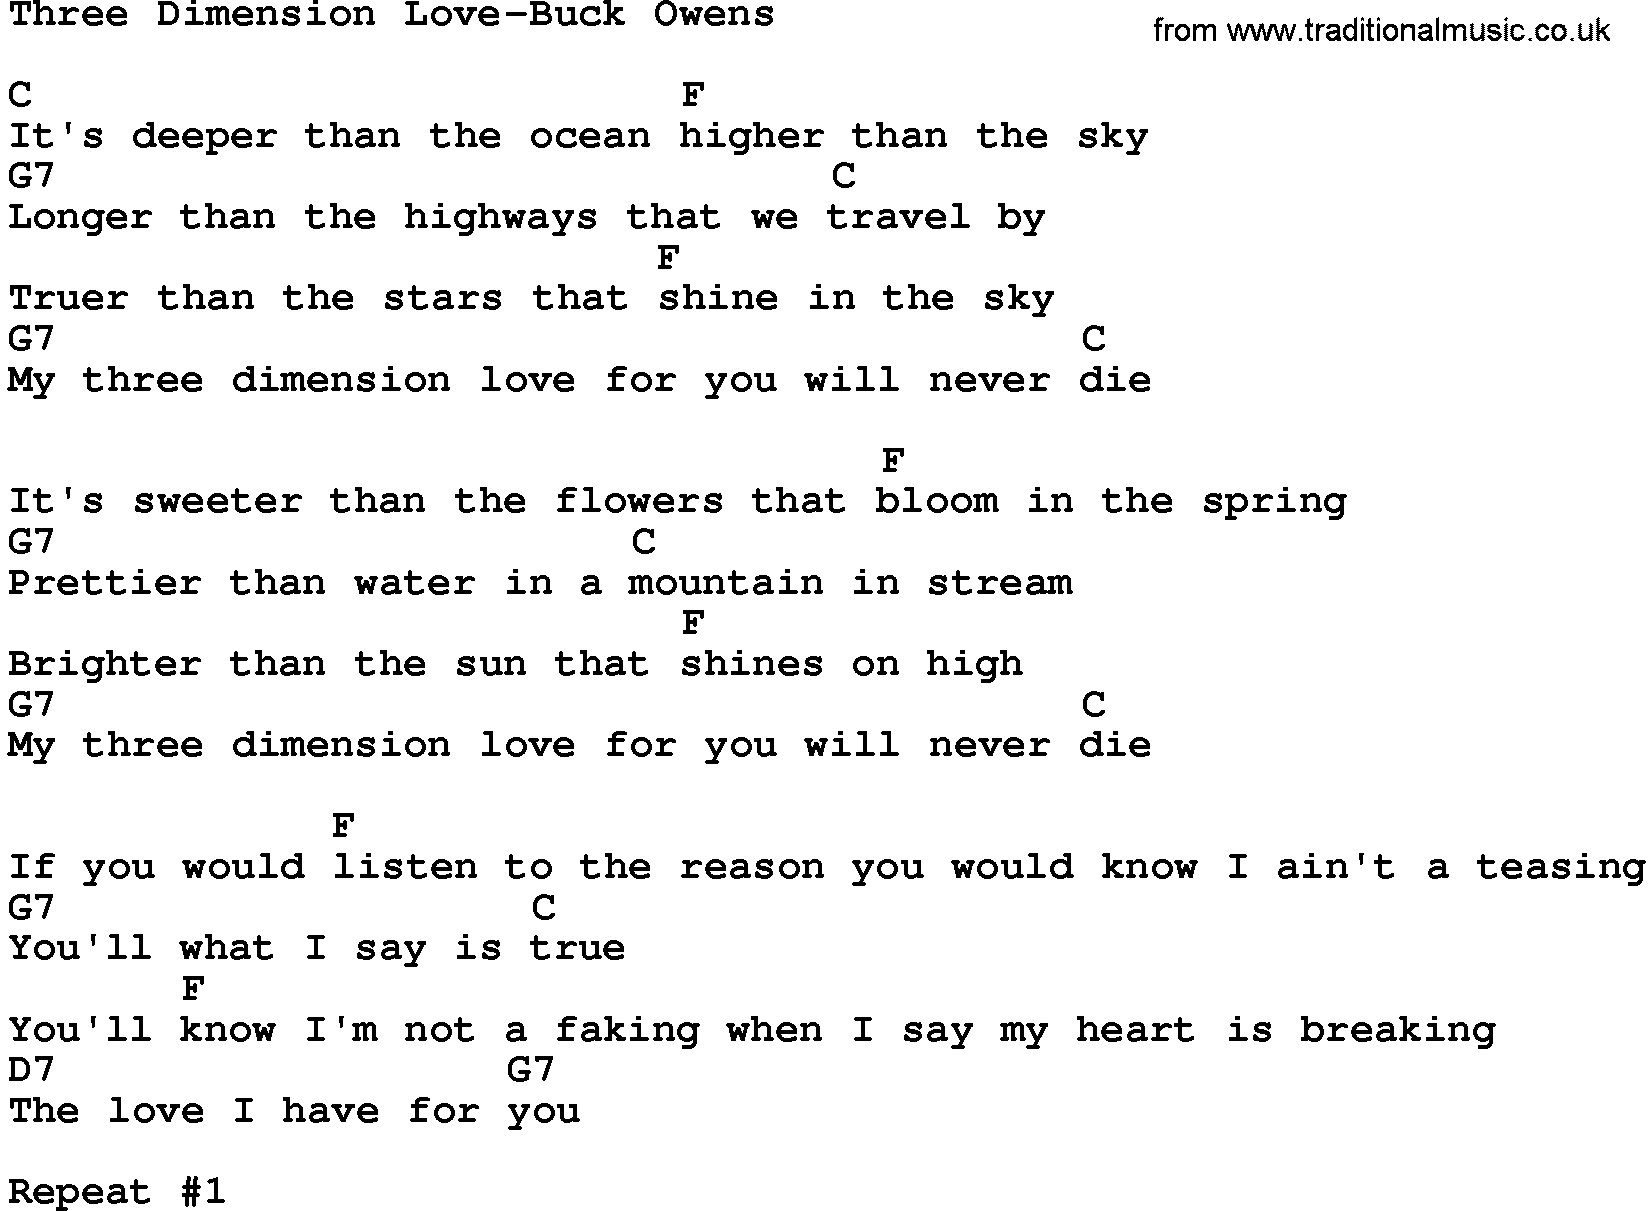 Country music song: Three Dimension Love-Buck Owens lyrics and chords